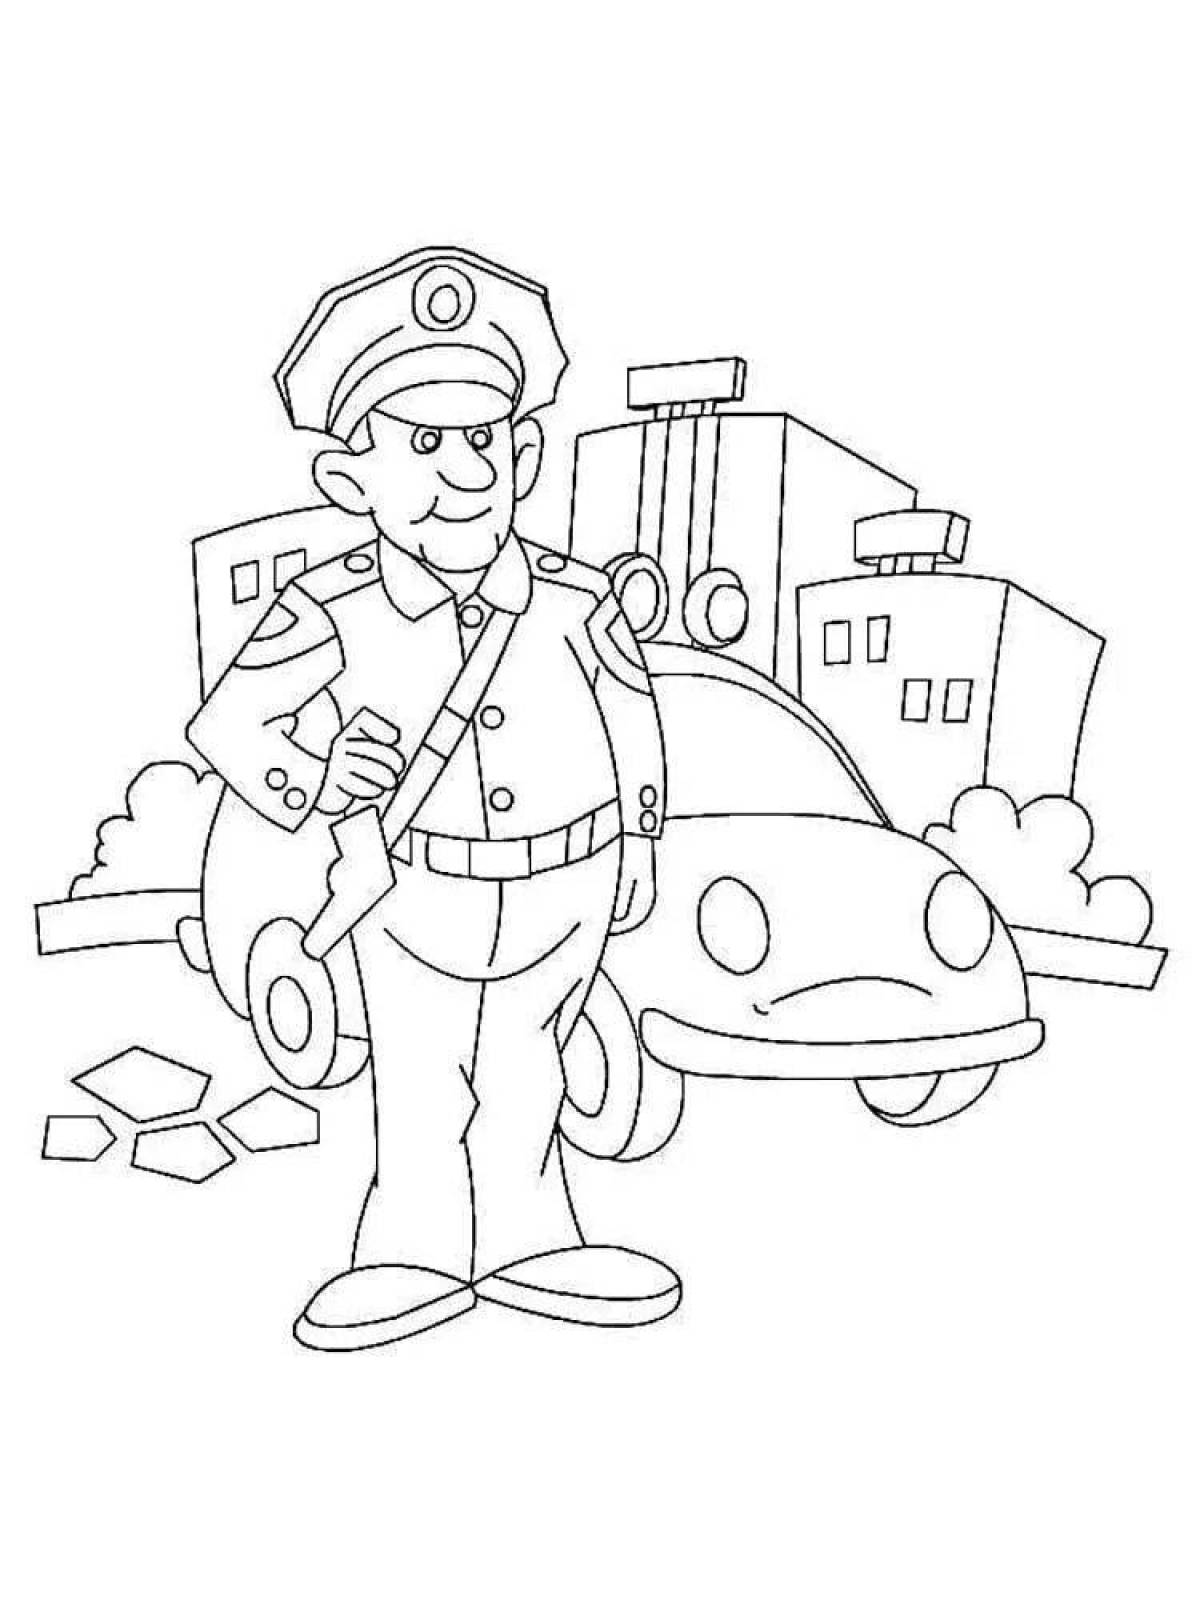 Watchful policeman coloring page